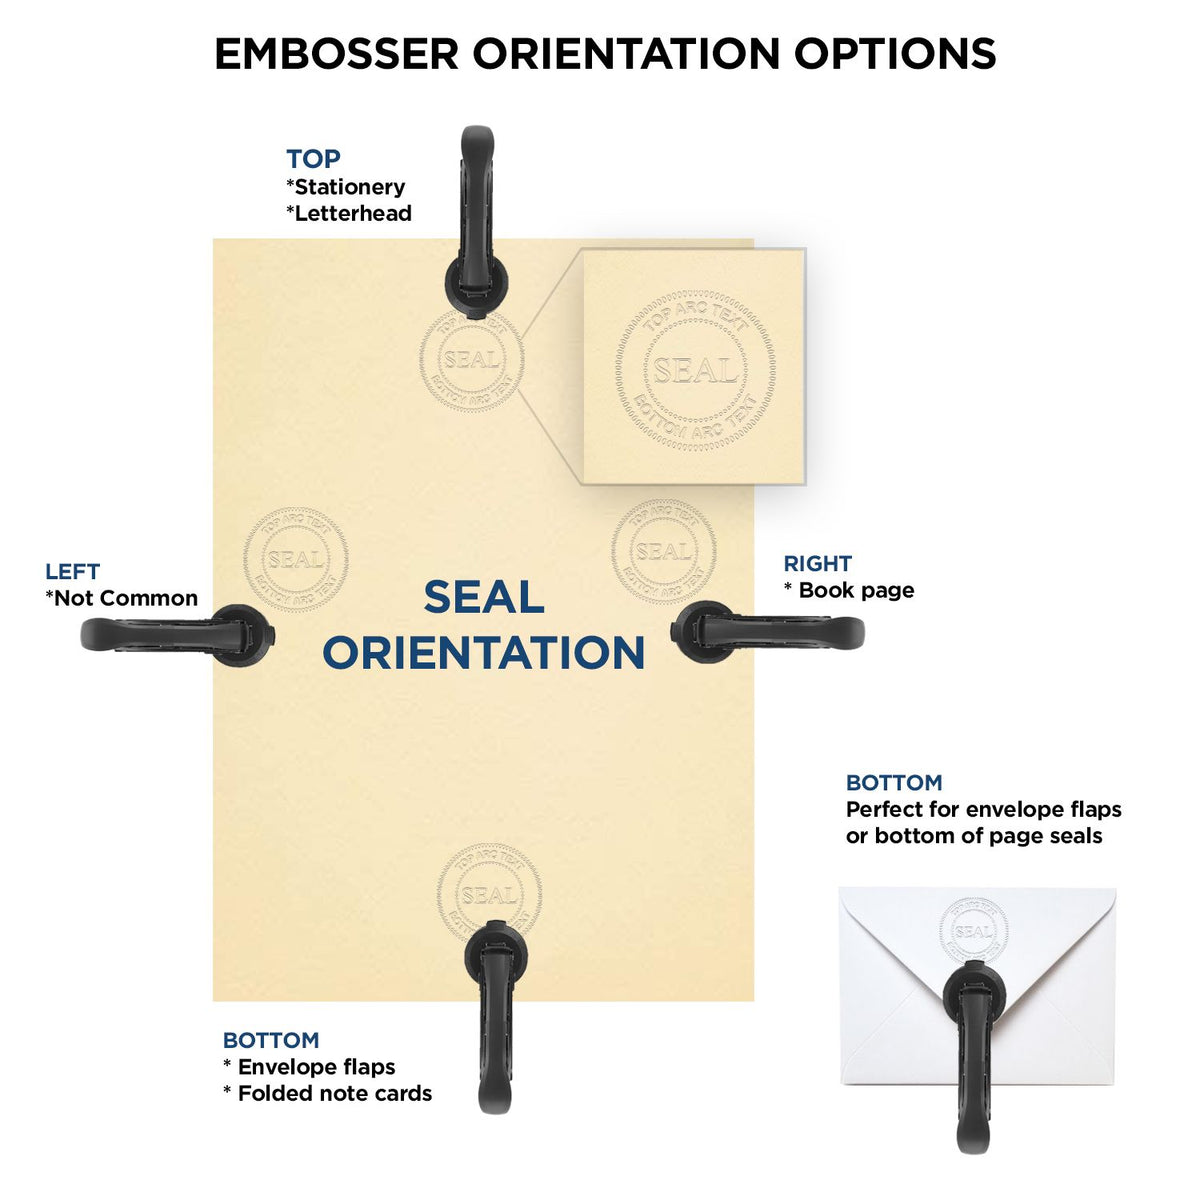 An infographic for the State of New Hampshire Long Reach Architectural Embossing Seal showing embosser orientation, this is showing examples of a top, bottom, right and left insert.